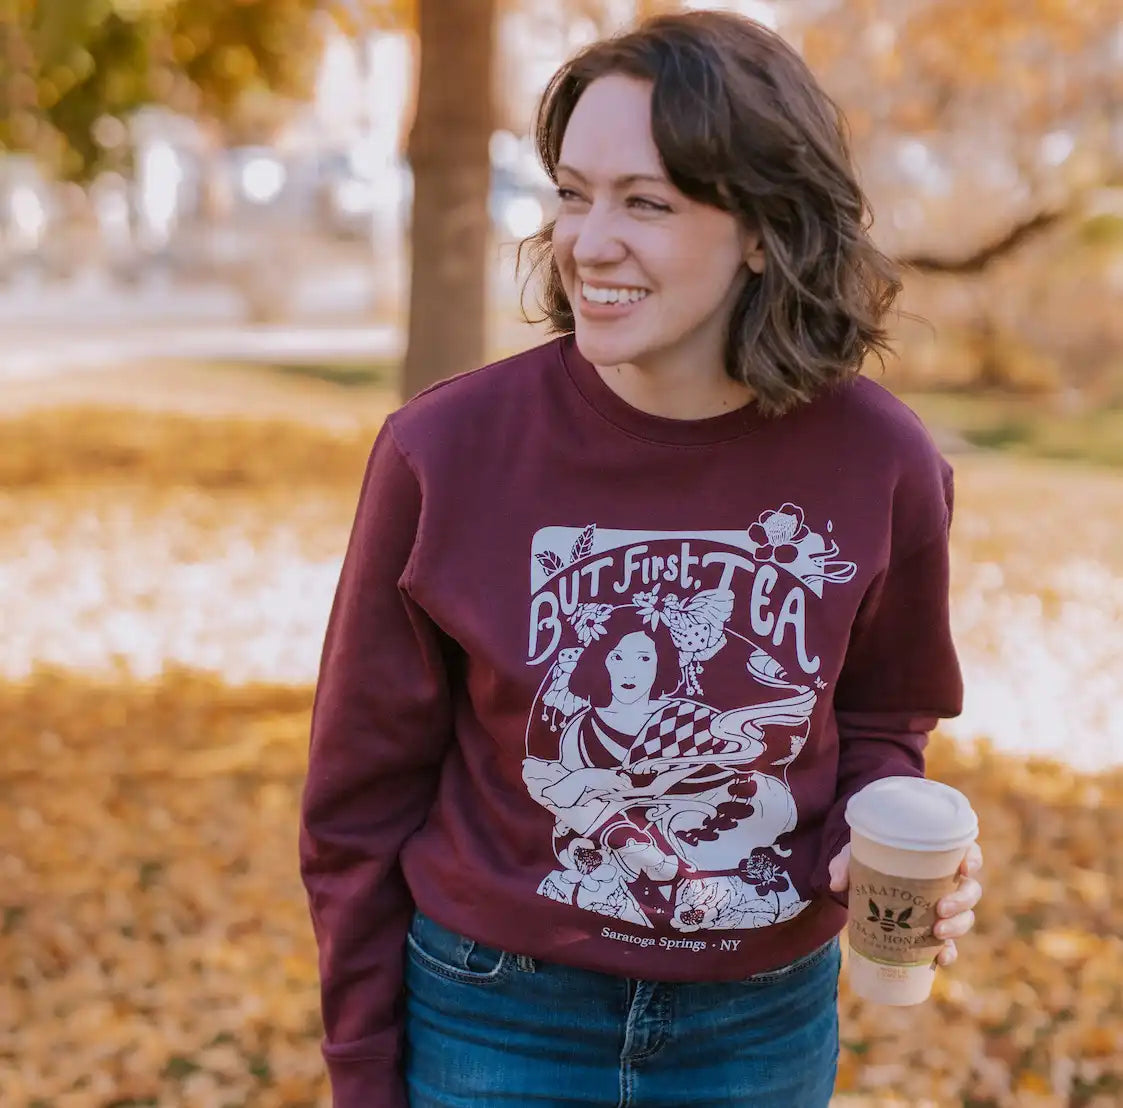 woman wearing maroon sweatshirt reading "but first tea" and holding a Saratoga Tea & Honey Co. to-go cup